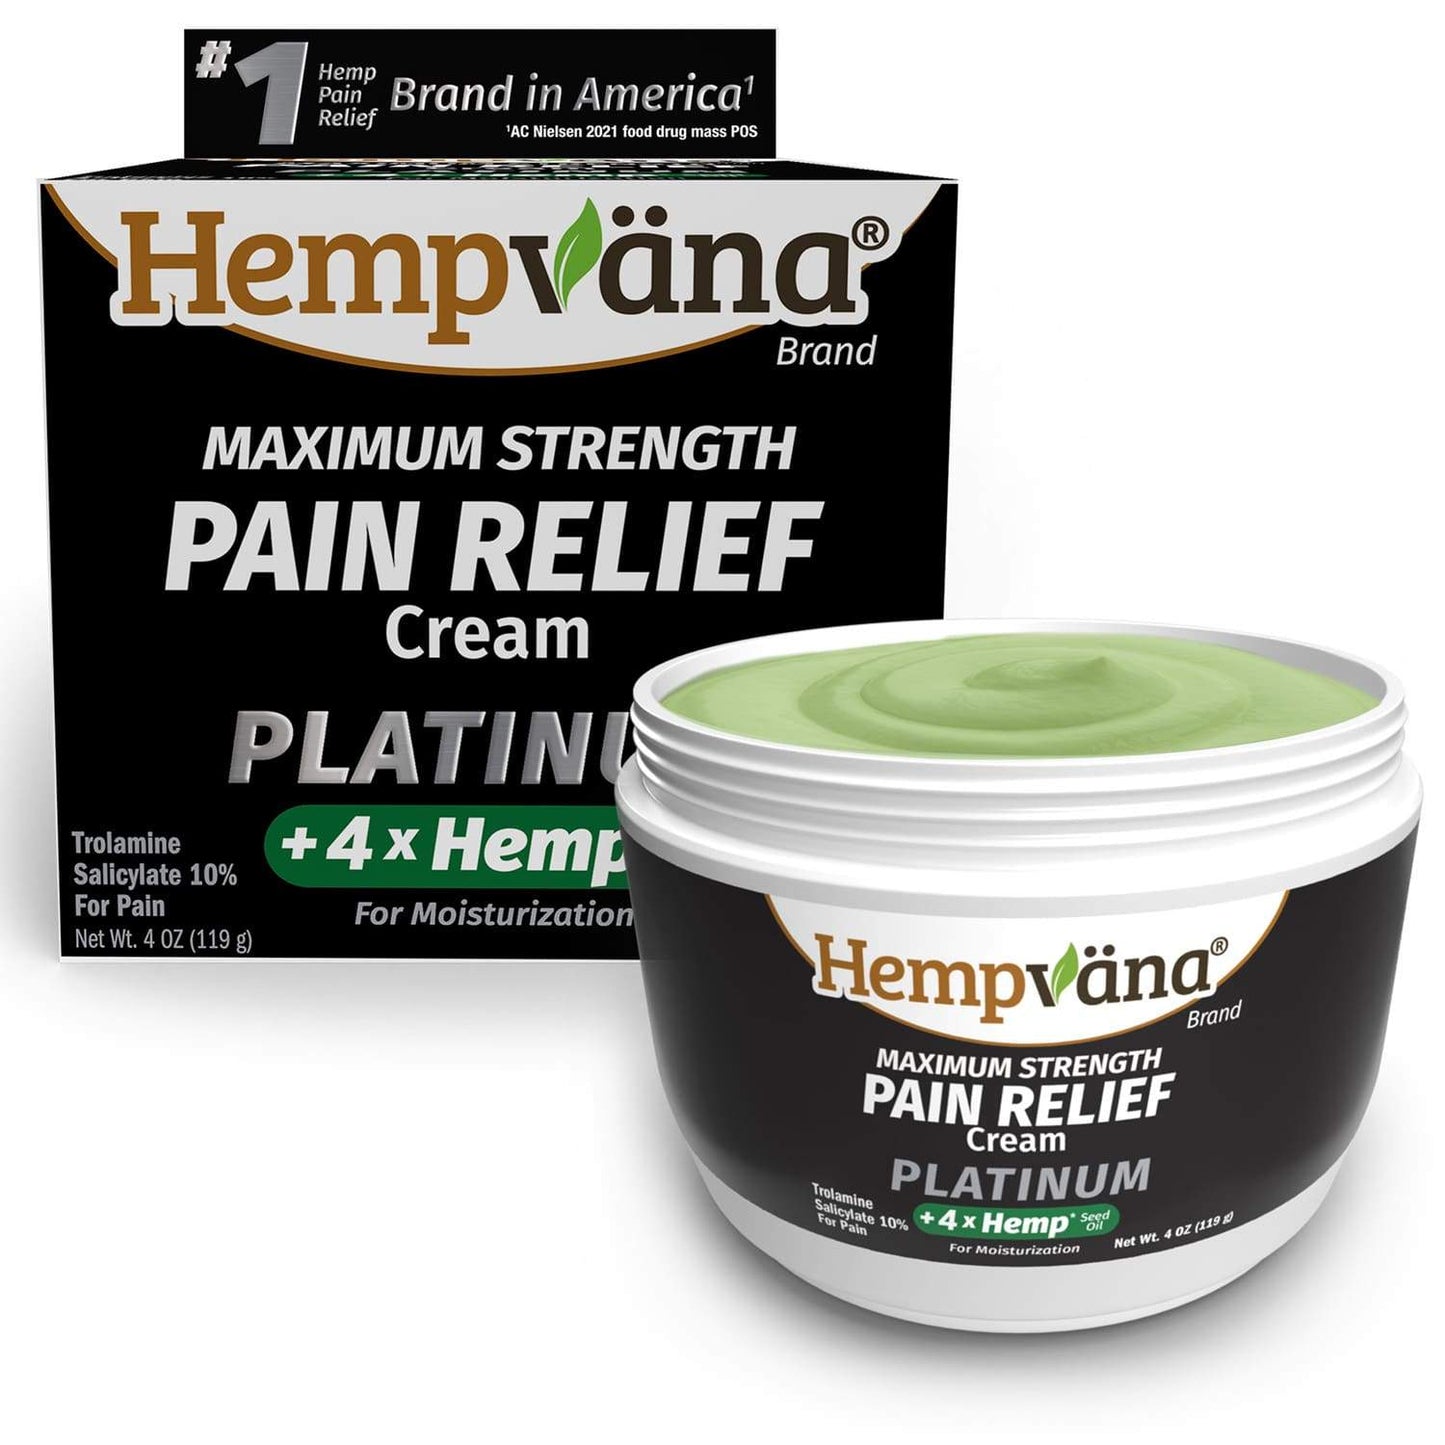 Jar of Hempvana Platinum Pain Relief Cream with black and white labeling, box in the background